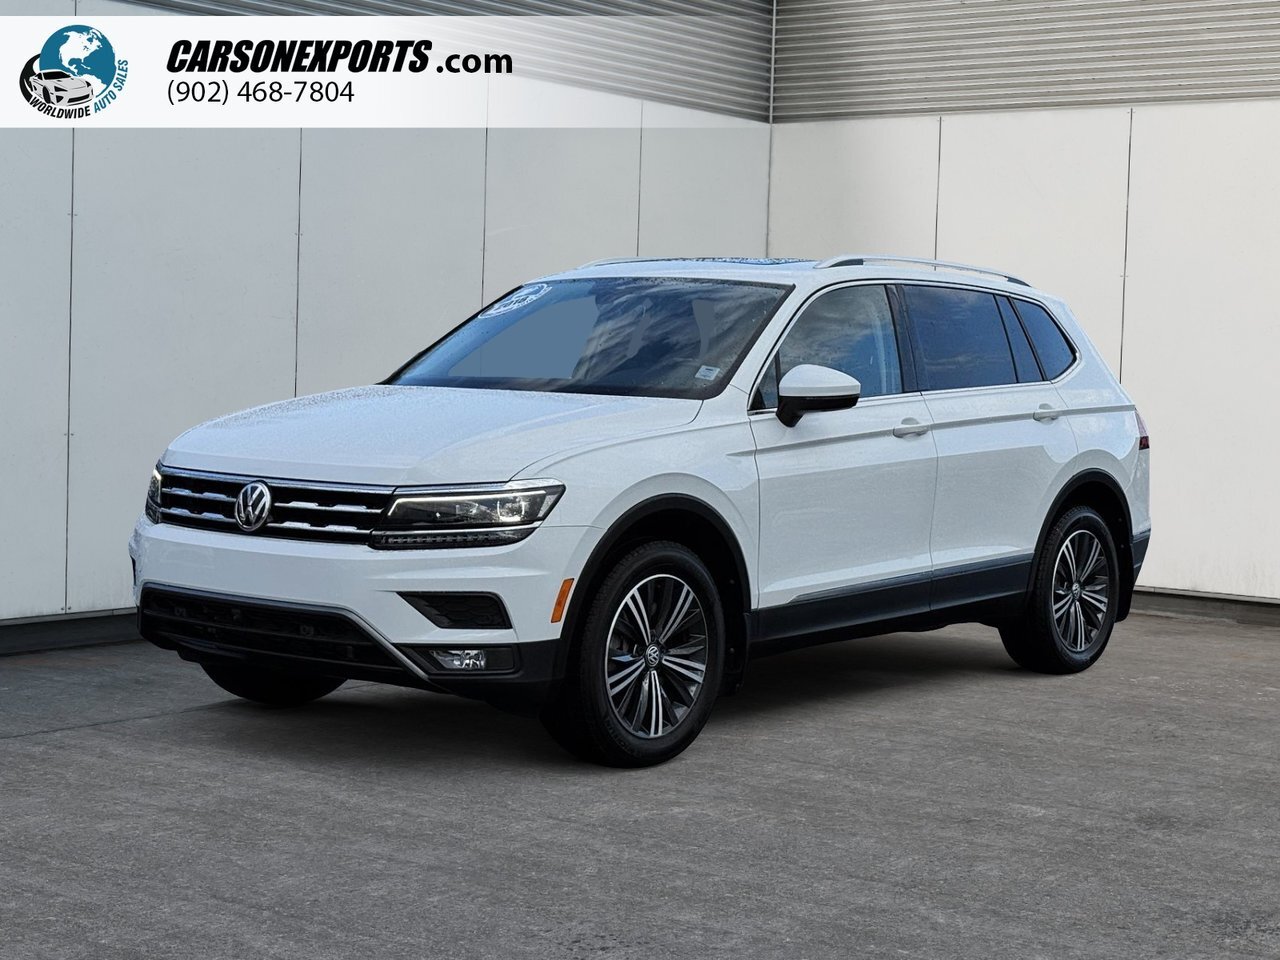 2018 Volkswagen Tiguan Highline The best place to buy a used car. Period.